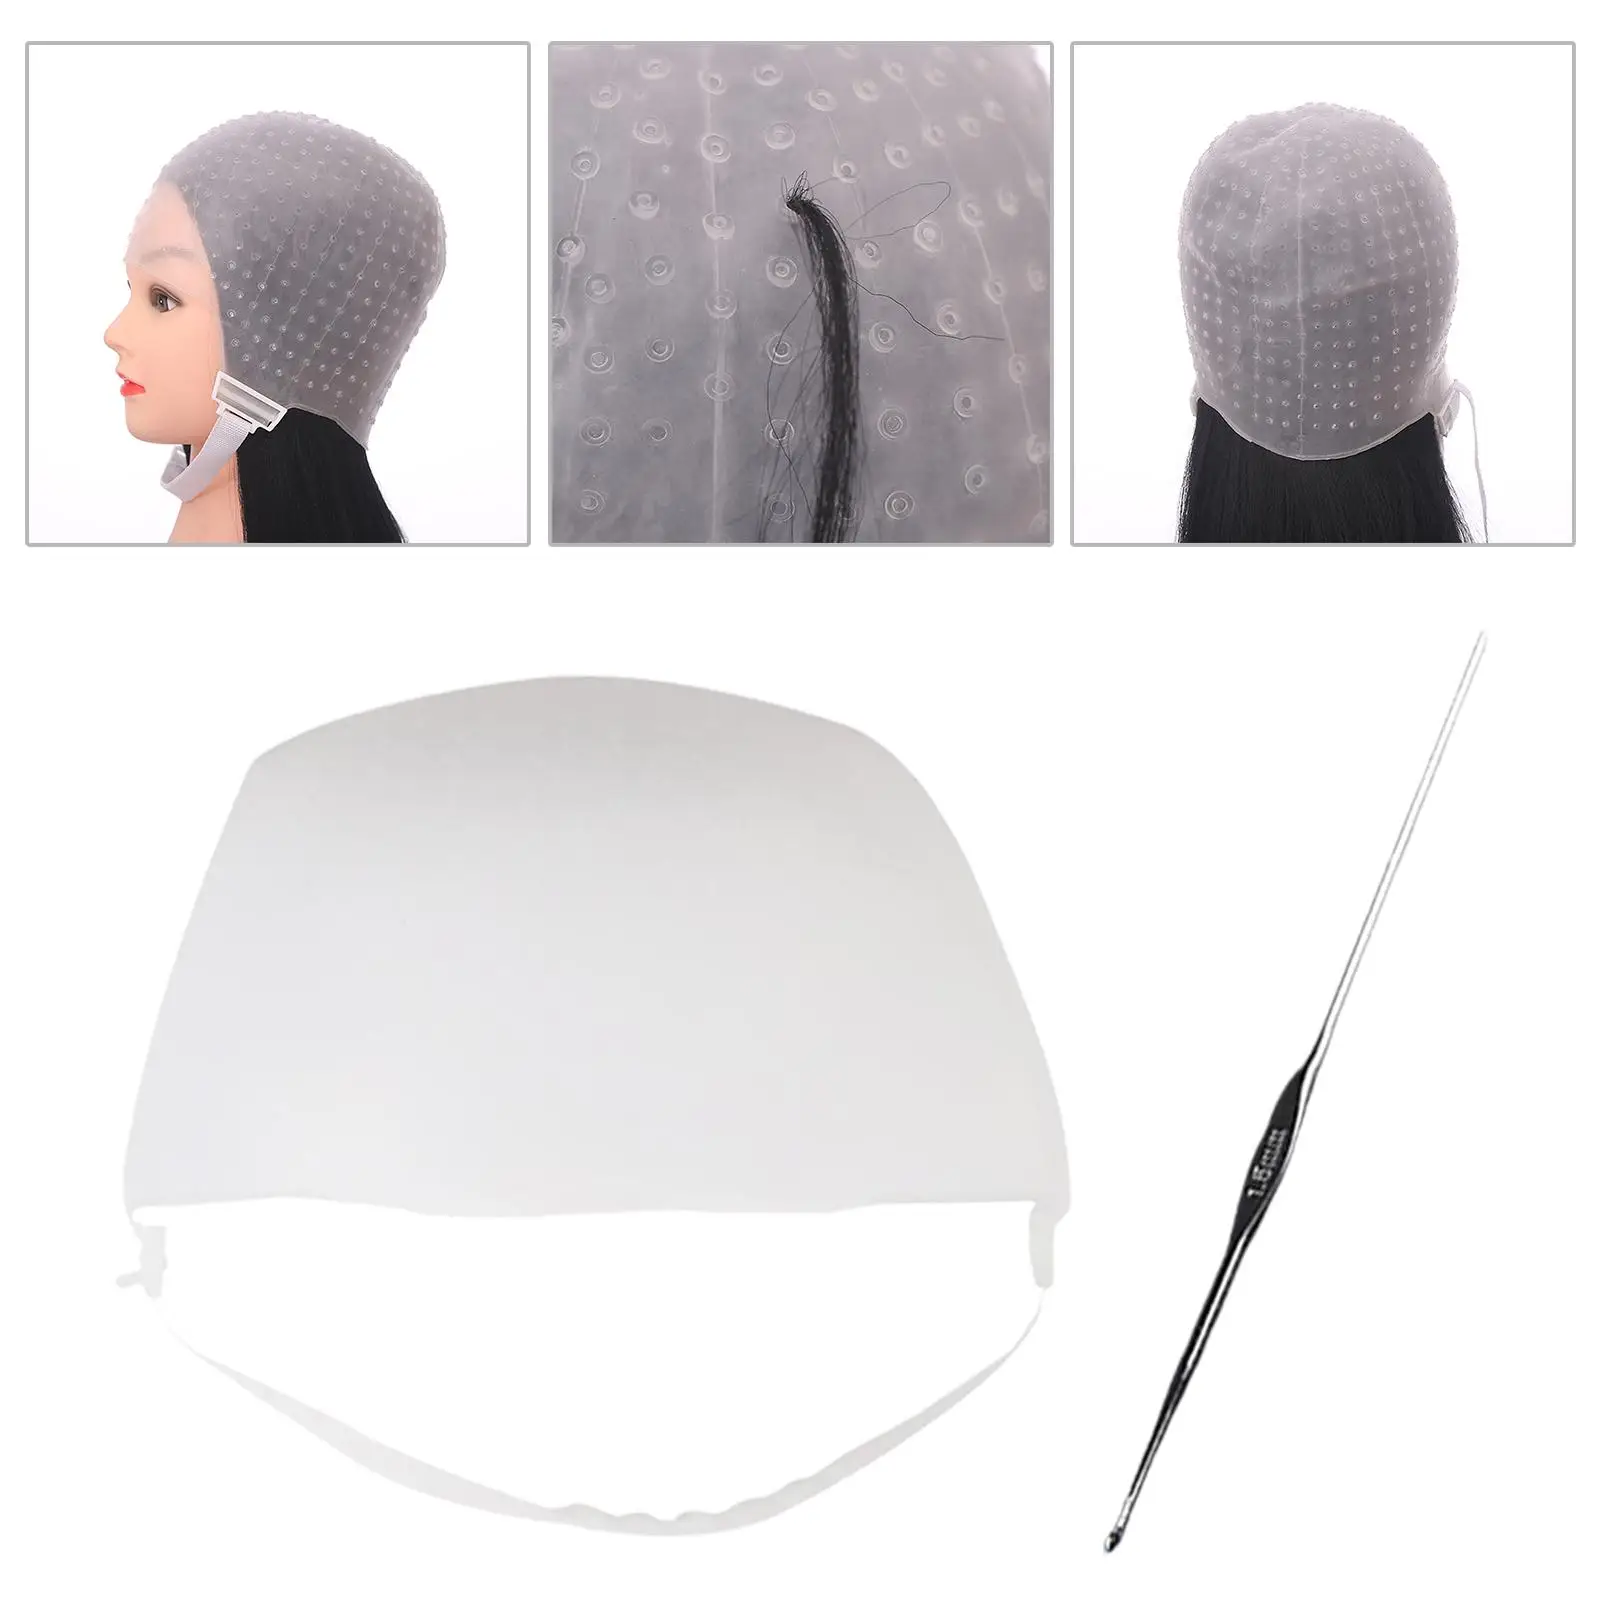 

Silicone Hair Coloring Highlighting Hat W/ Needle Binding Band White Soft Hair Dye Hat for Barber Salon Home and Salon Use Women